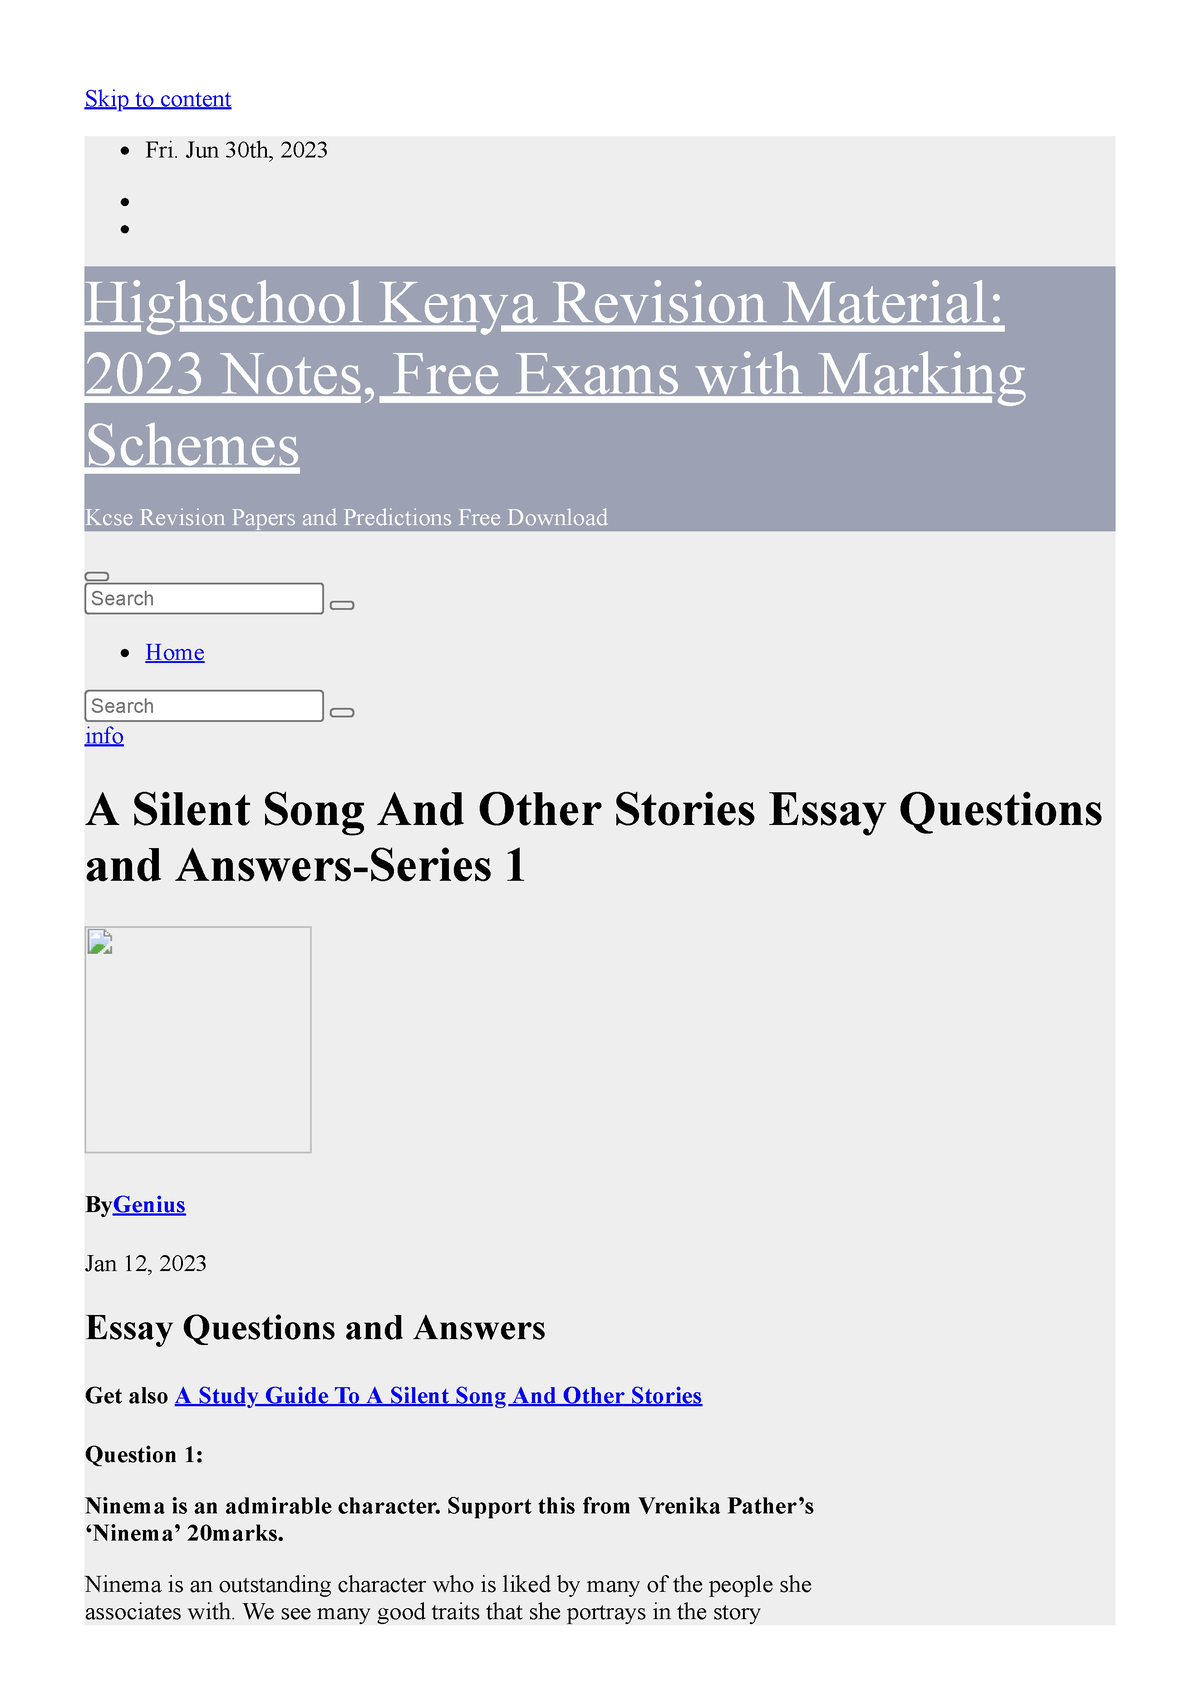 essay on silent song